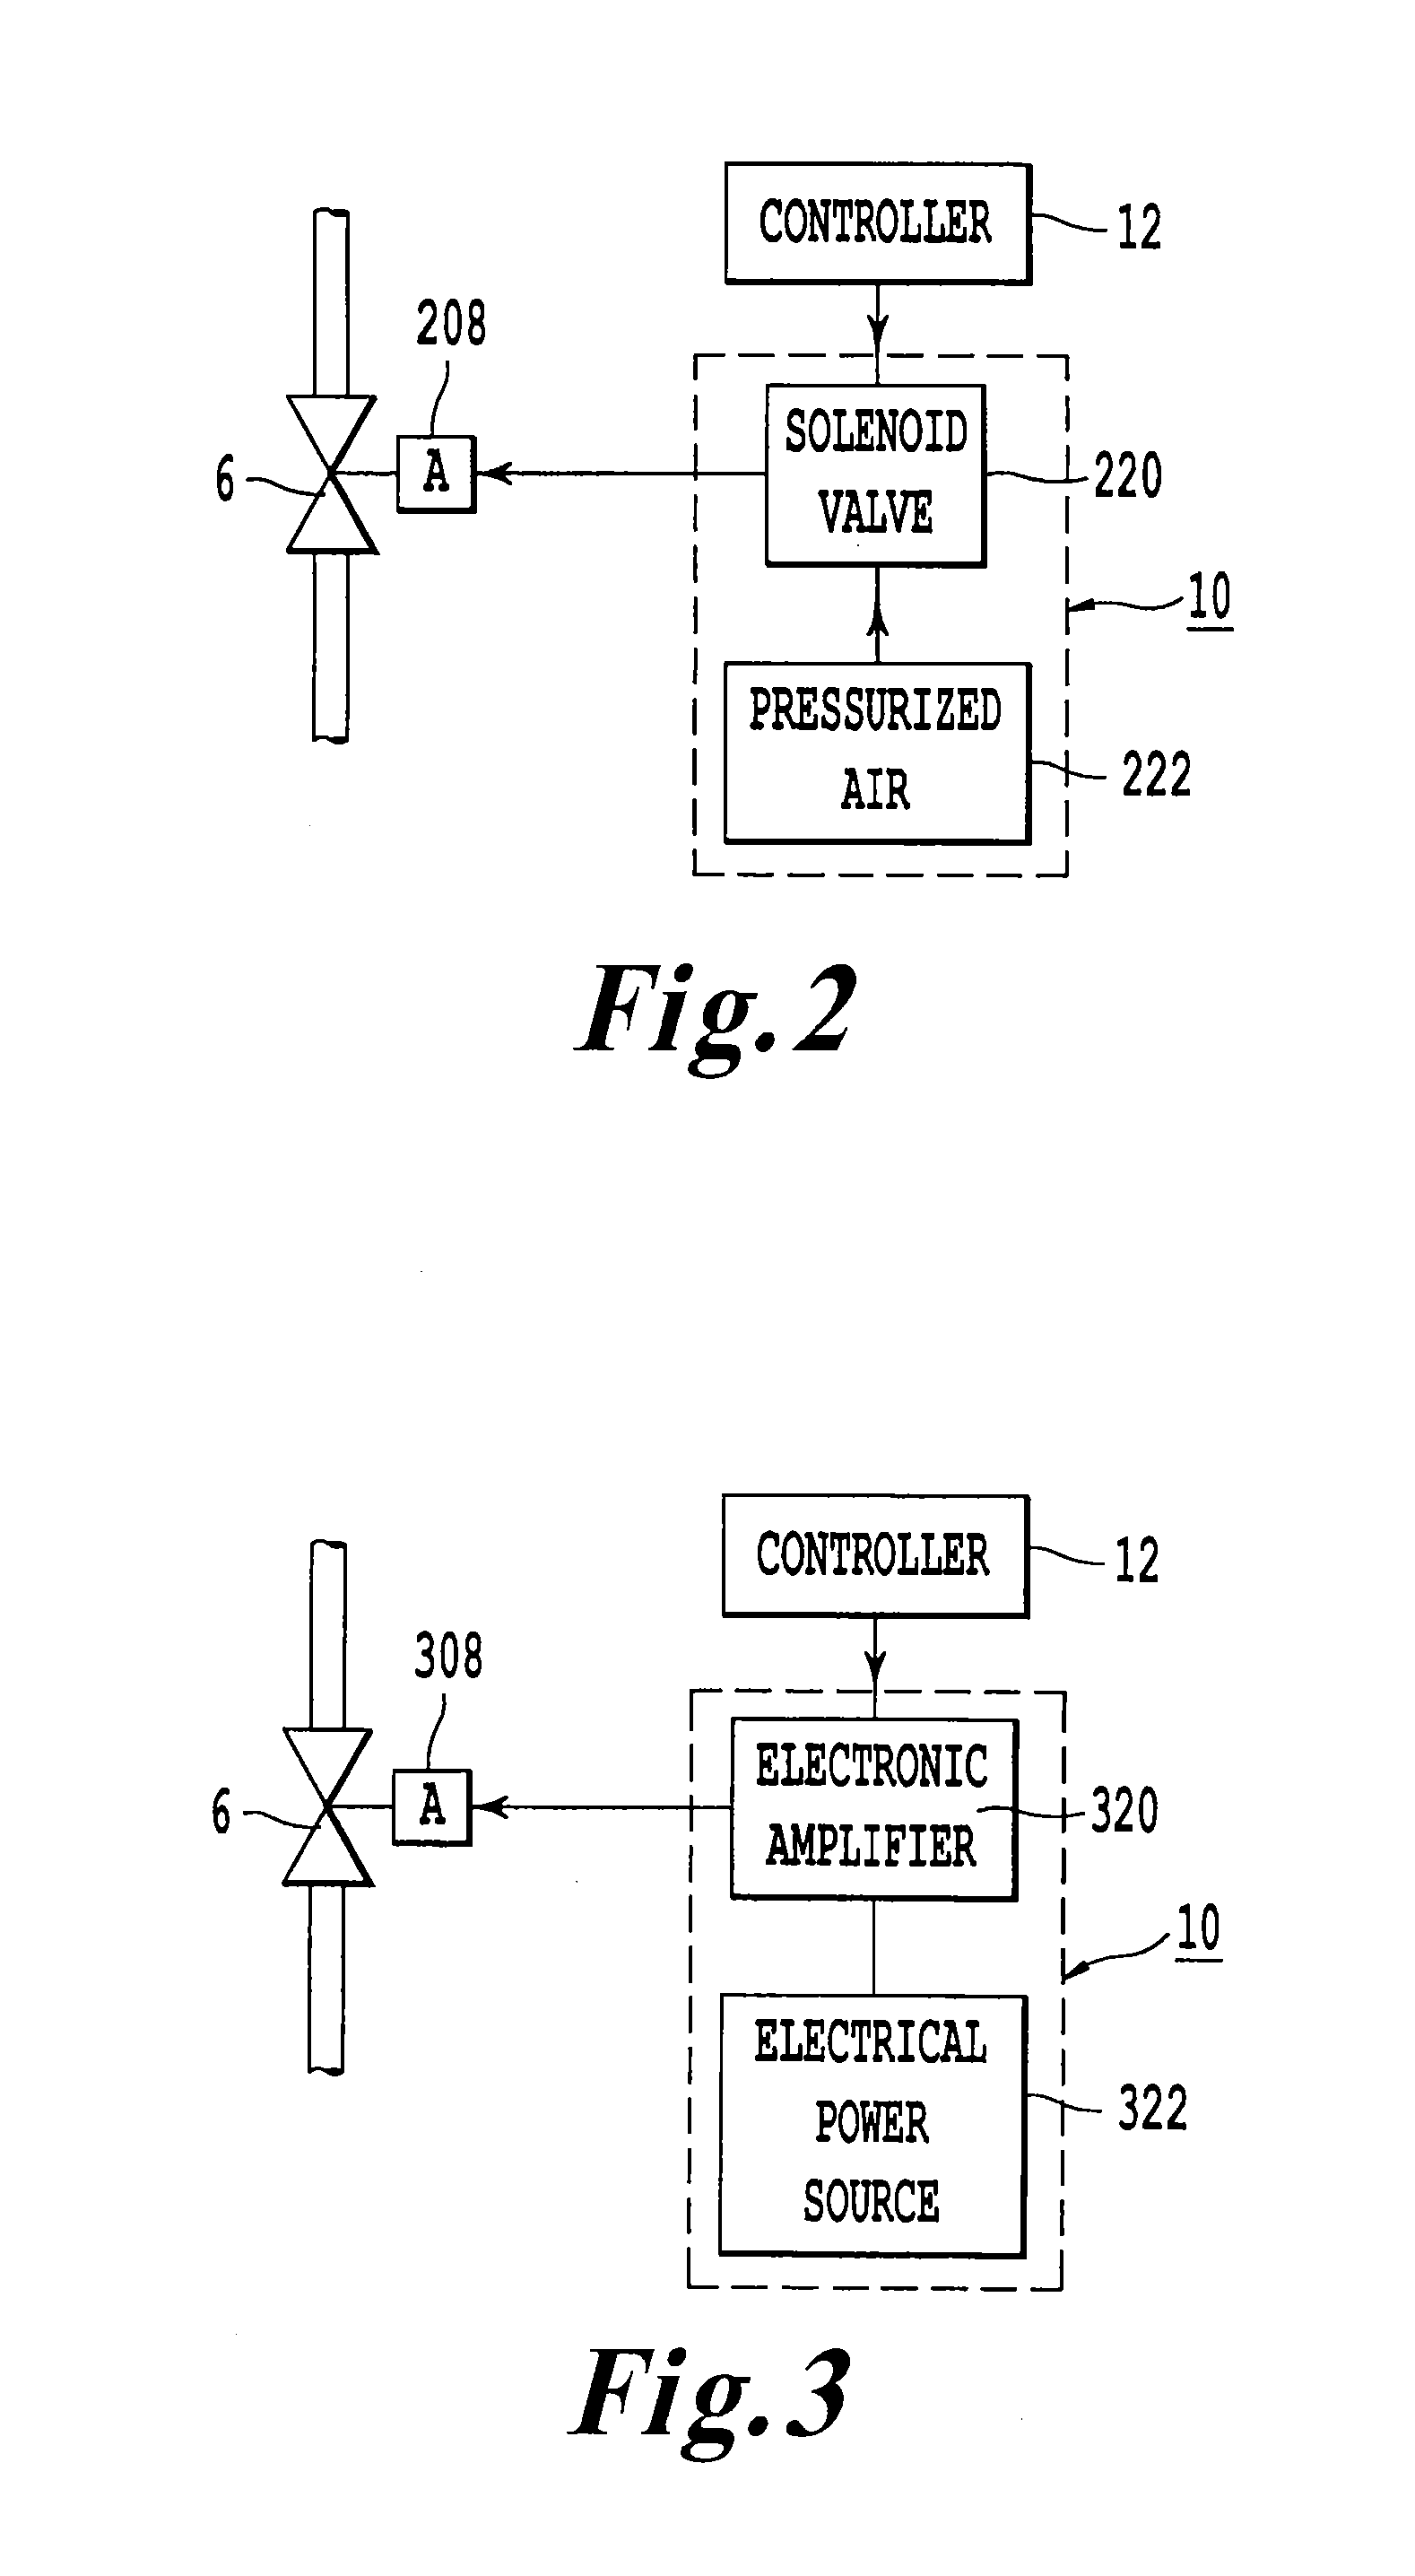 Apparatus and method for filling a mold with a liquid material